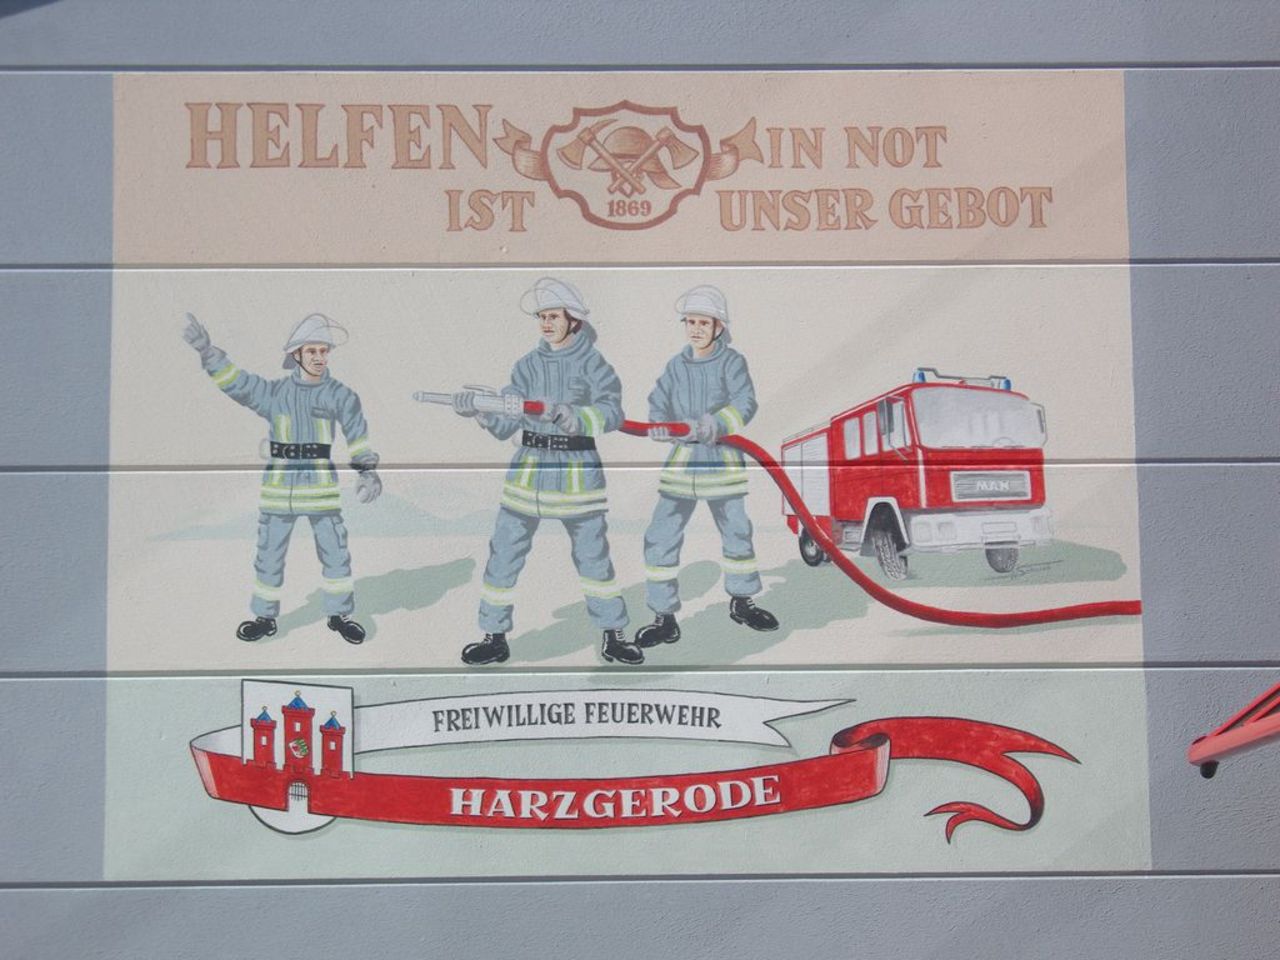 Mural from a rural town in Germany (volunteer fire fighters)